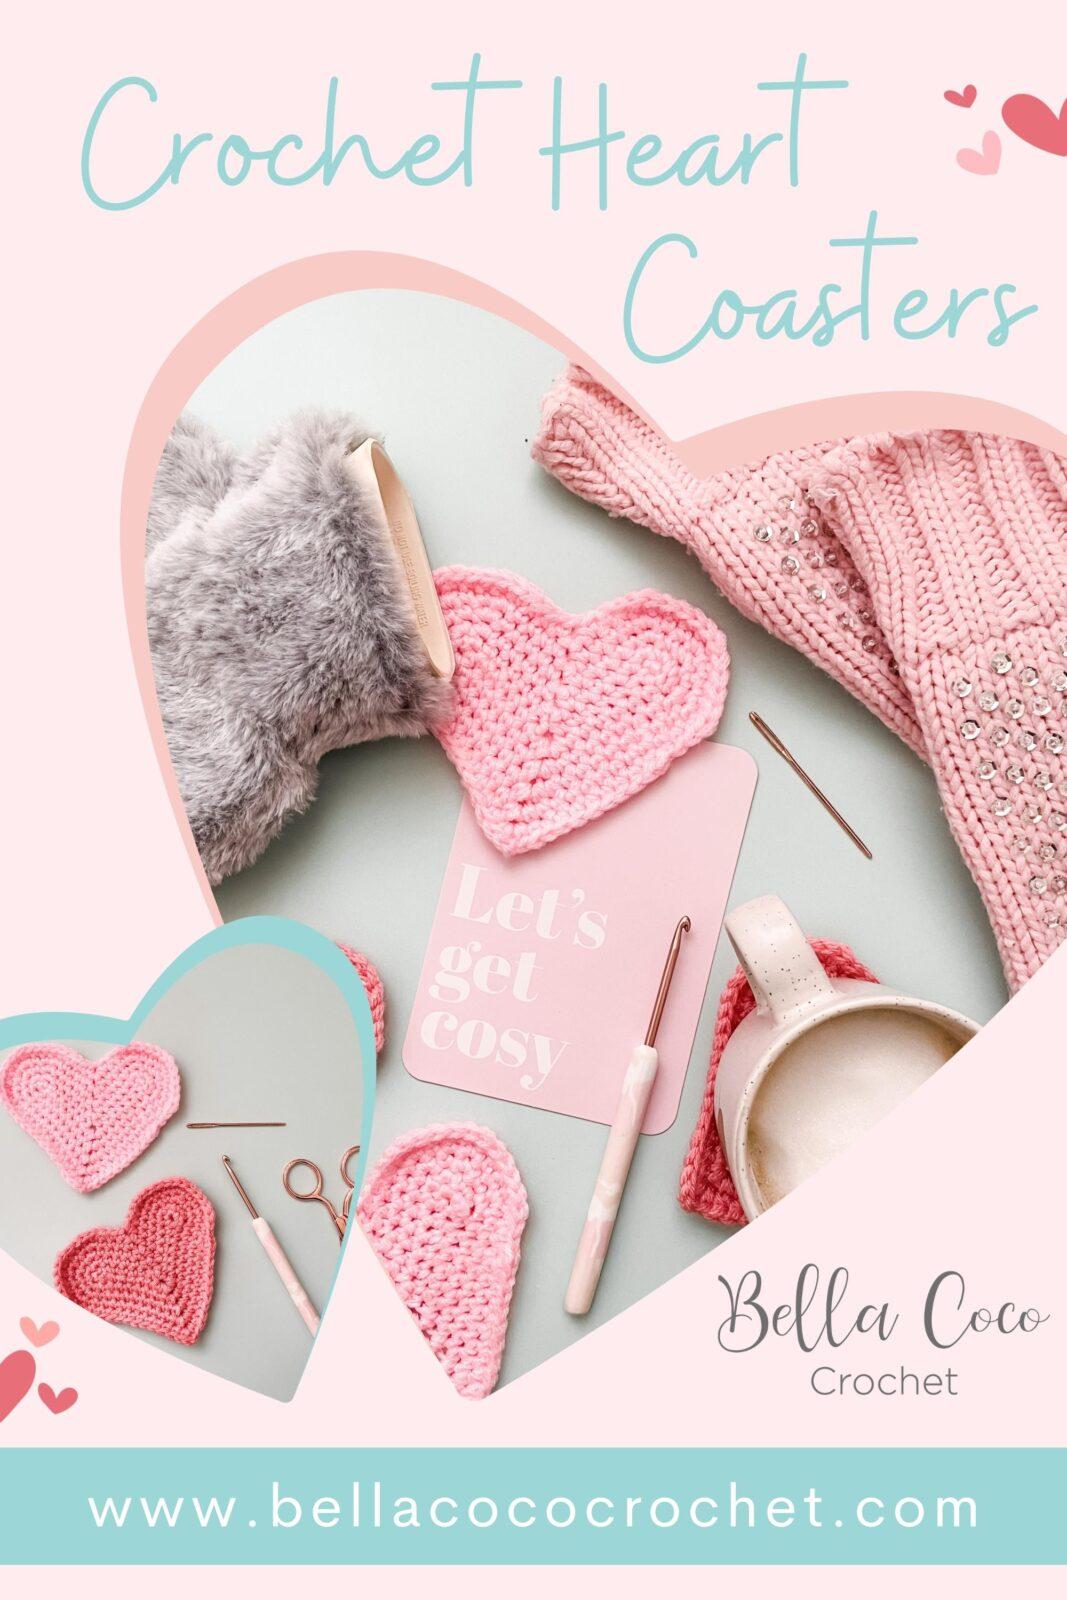 Pinable image for Pinterest of crochet heart shaped coasters. Pattern by Bella Coco Crochet